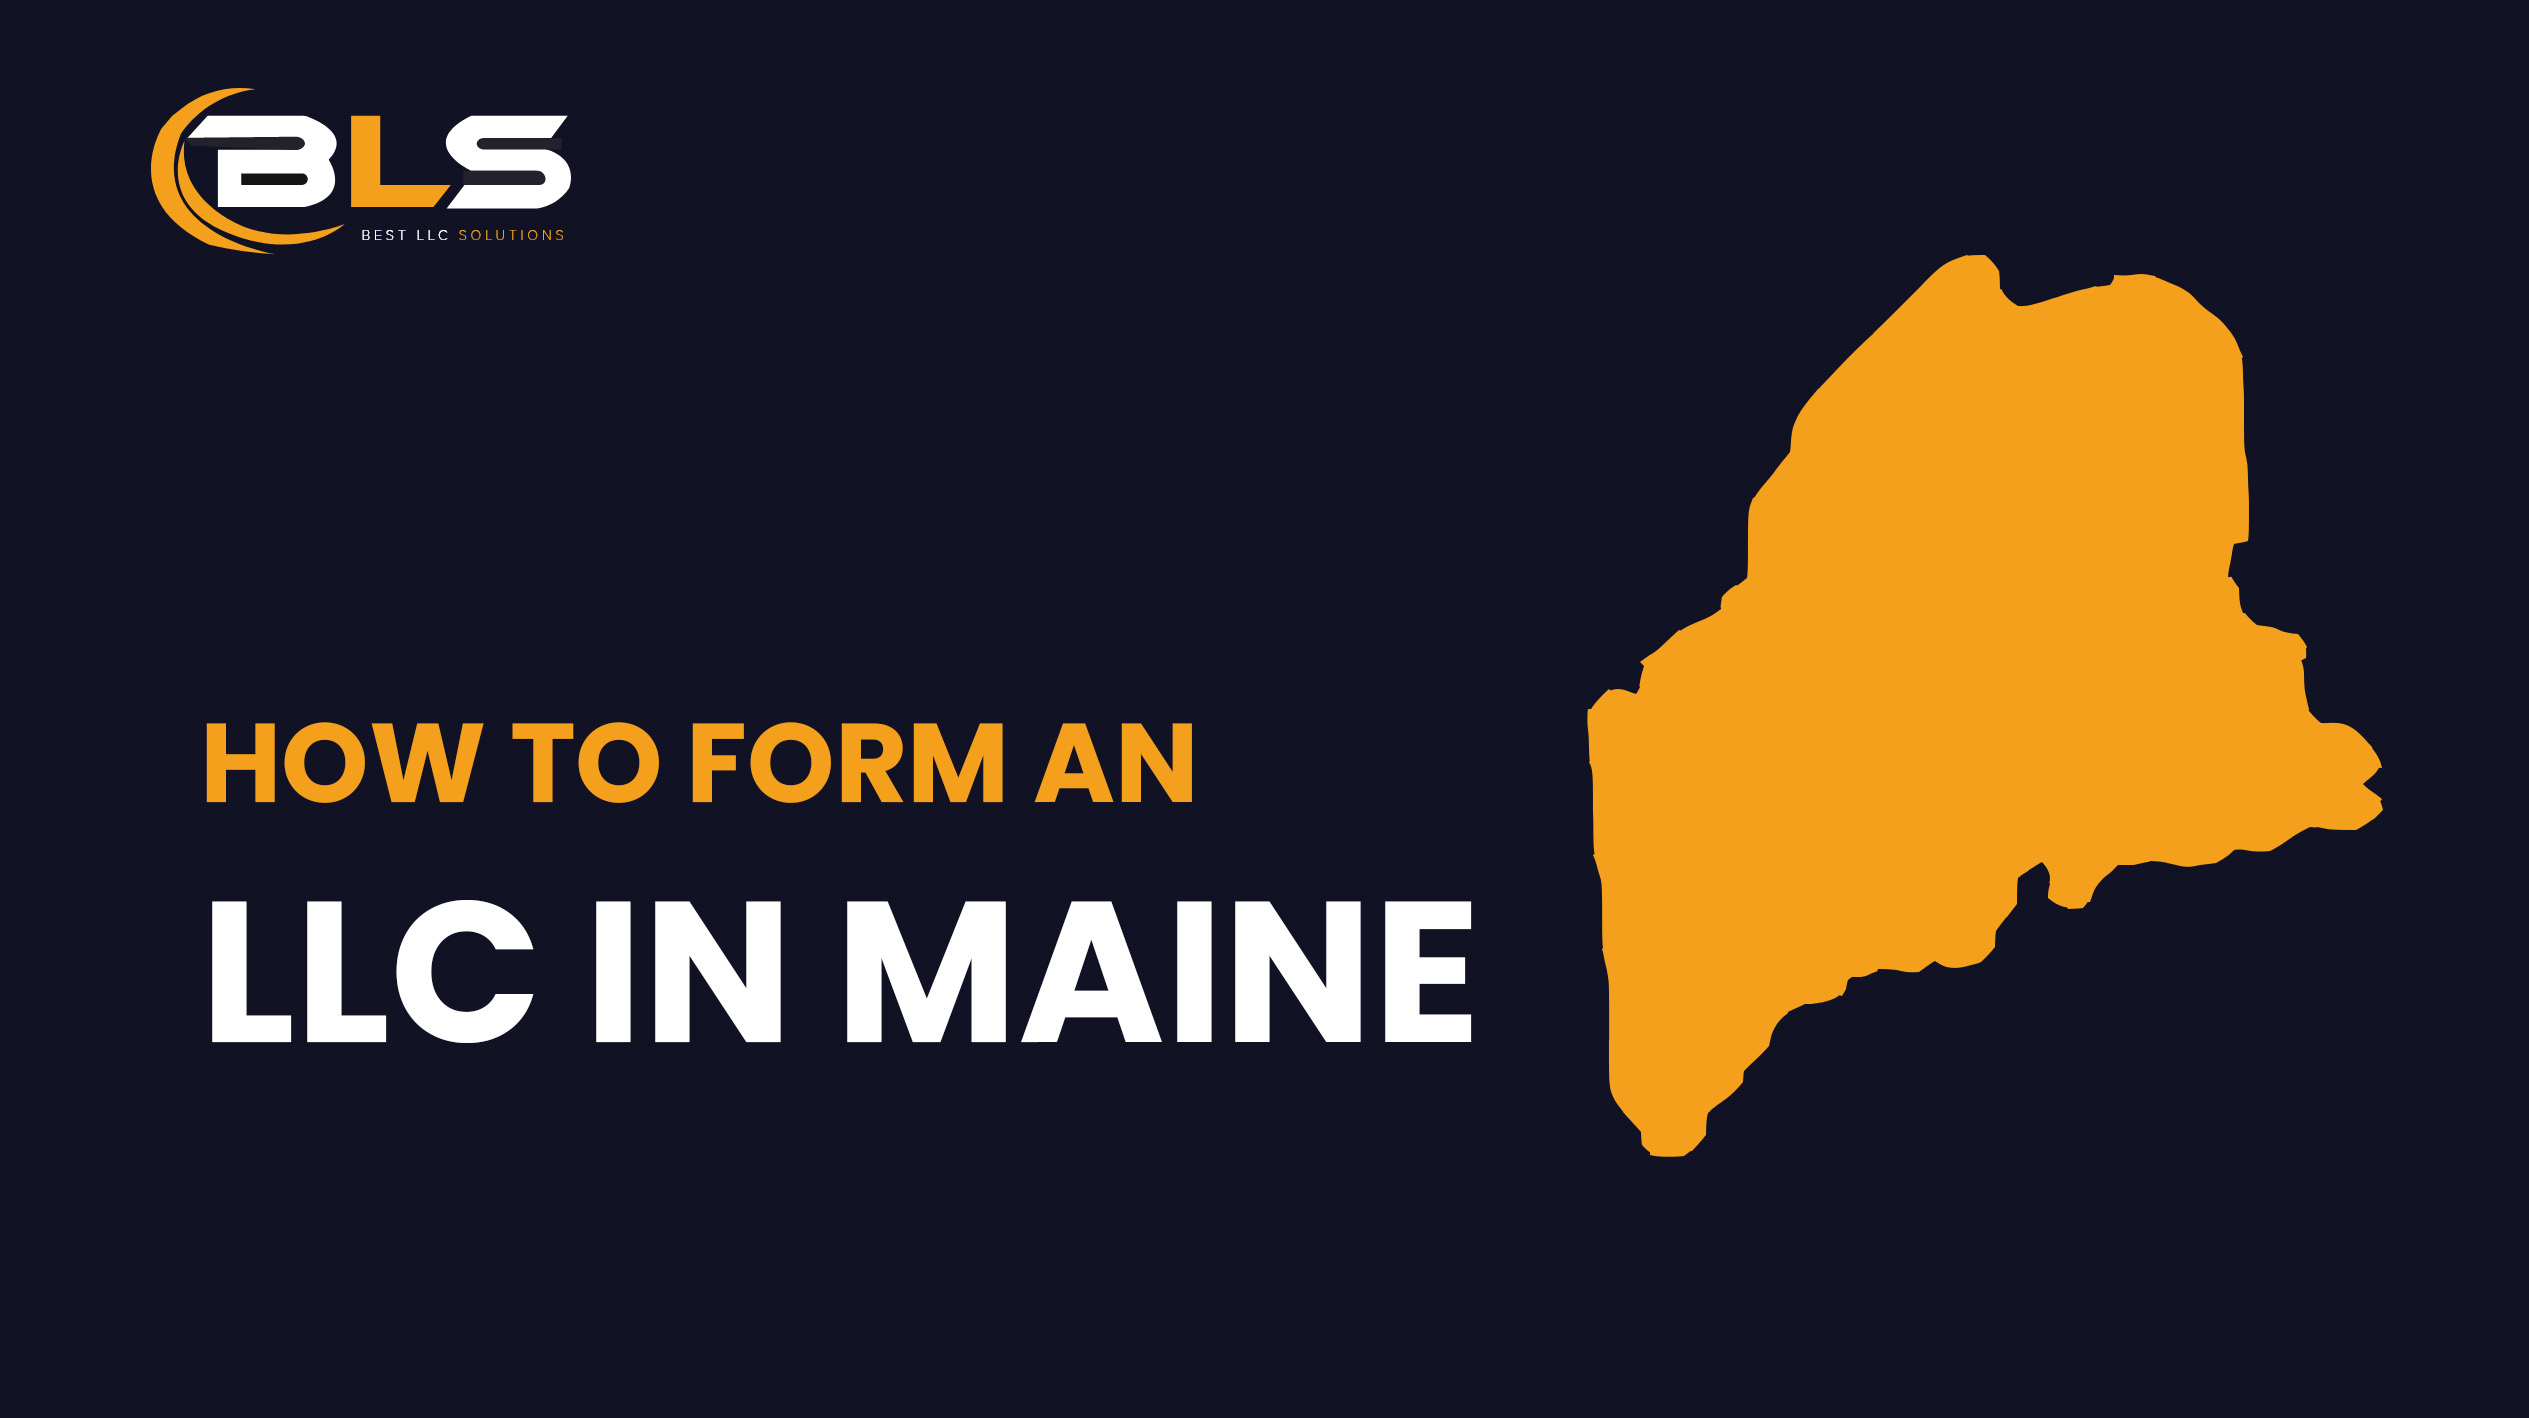 How To Form An LLC in Maine